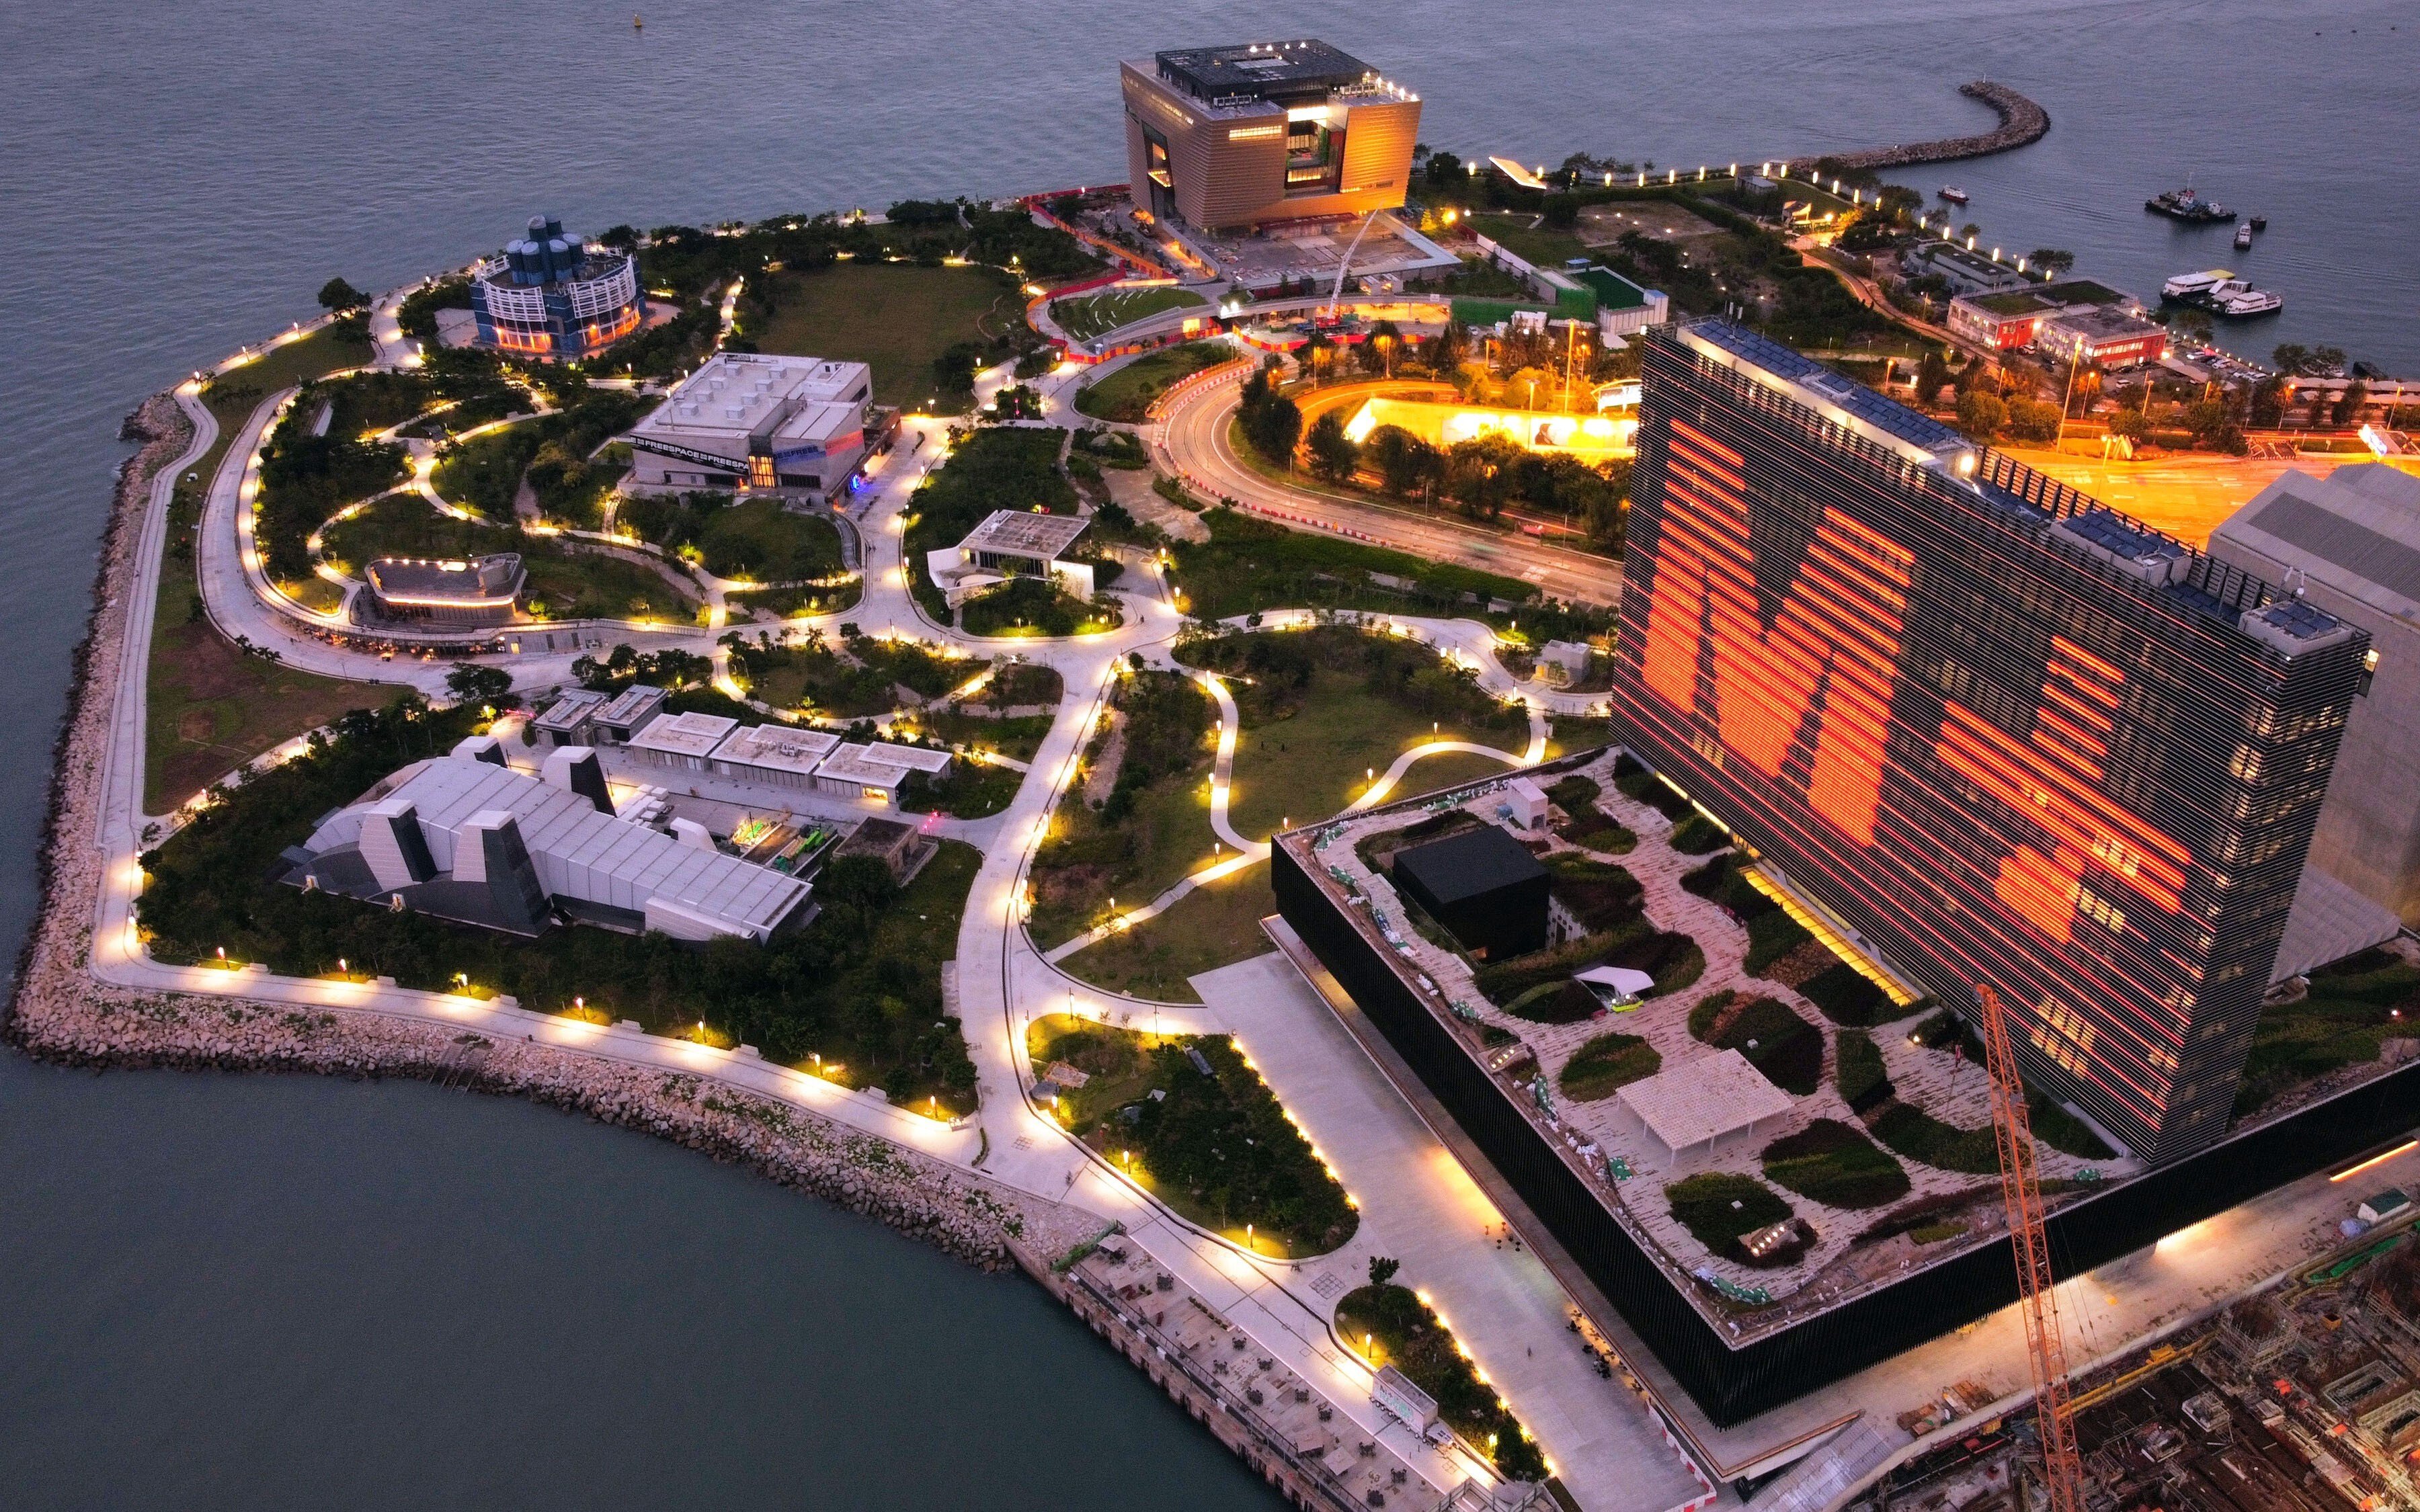 Hong Kong’s M+ museum of visual culture, part of the West Kowloon Cultural District, will open on November 12. Photo: Martin Chan